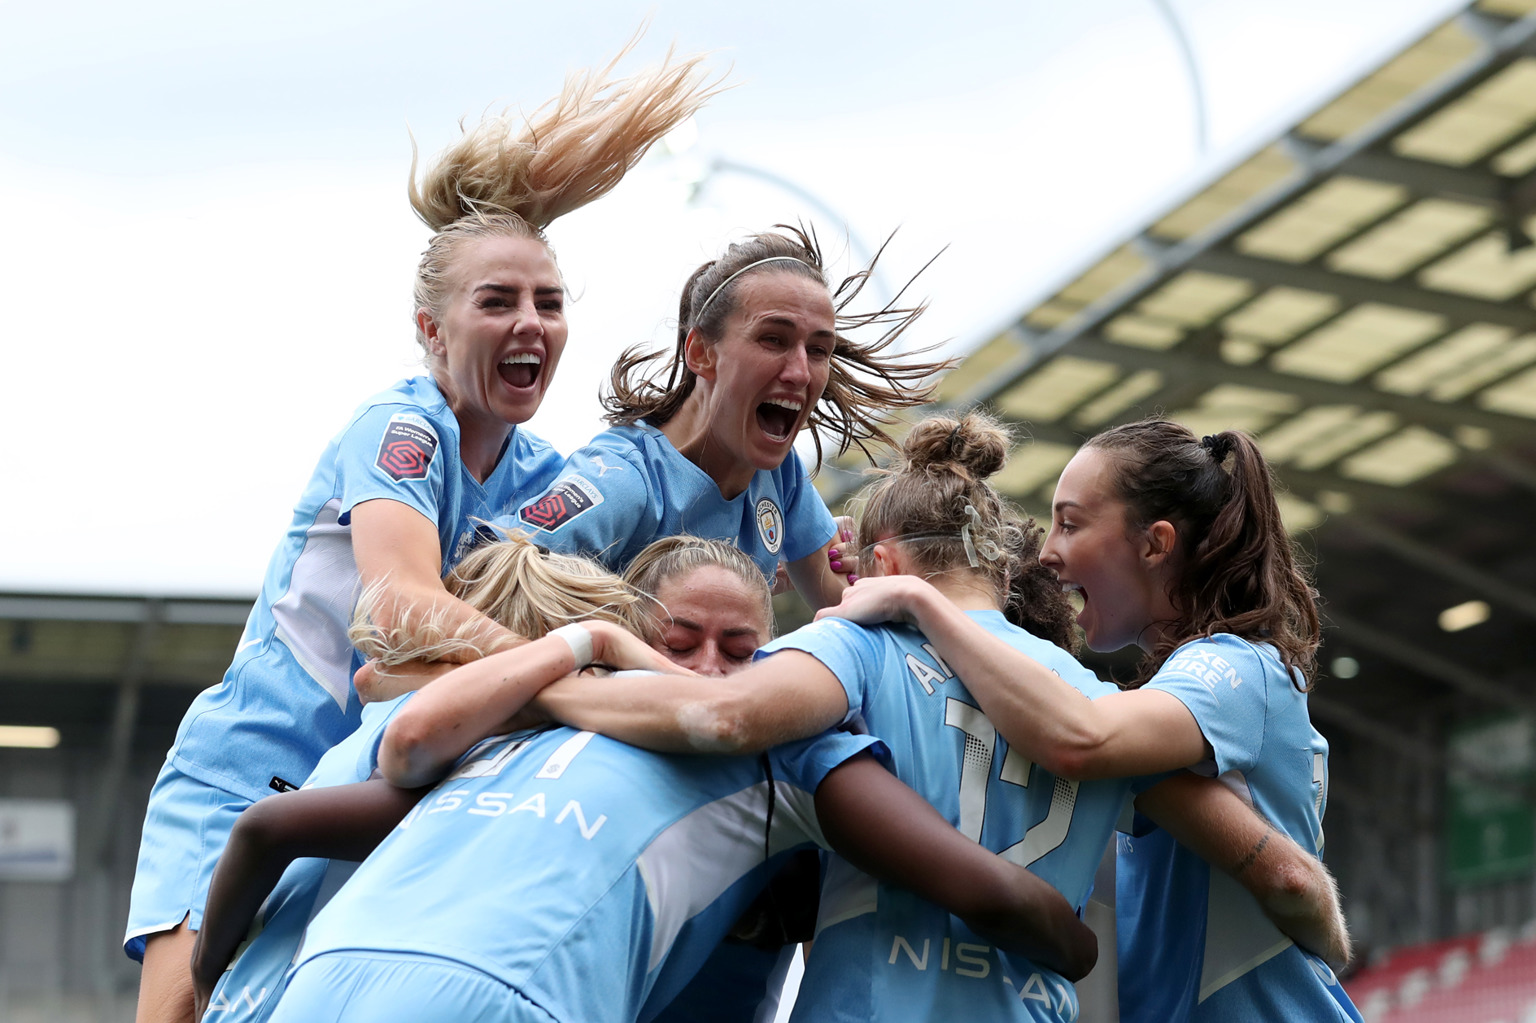 City fight back as spoils shared in Derby Day thriller